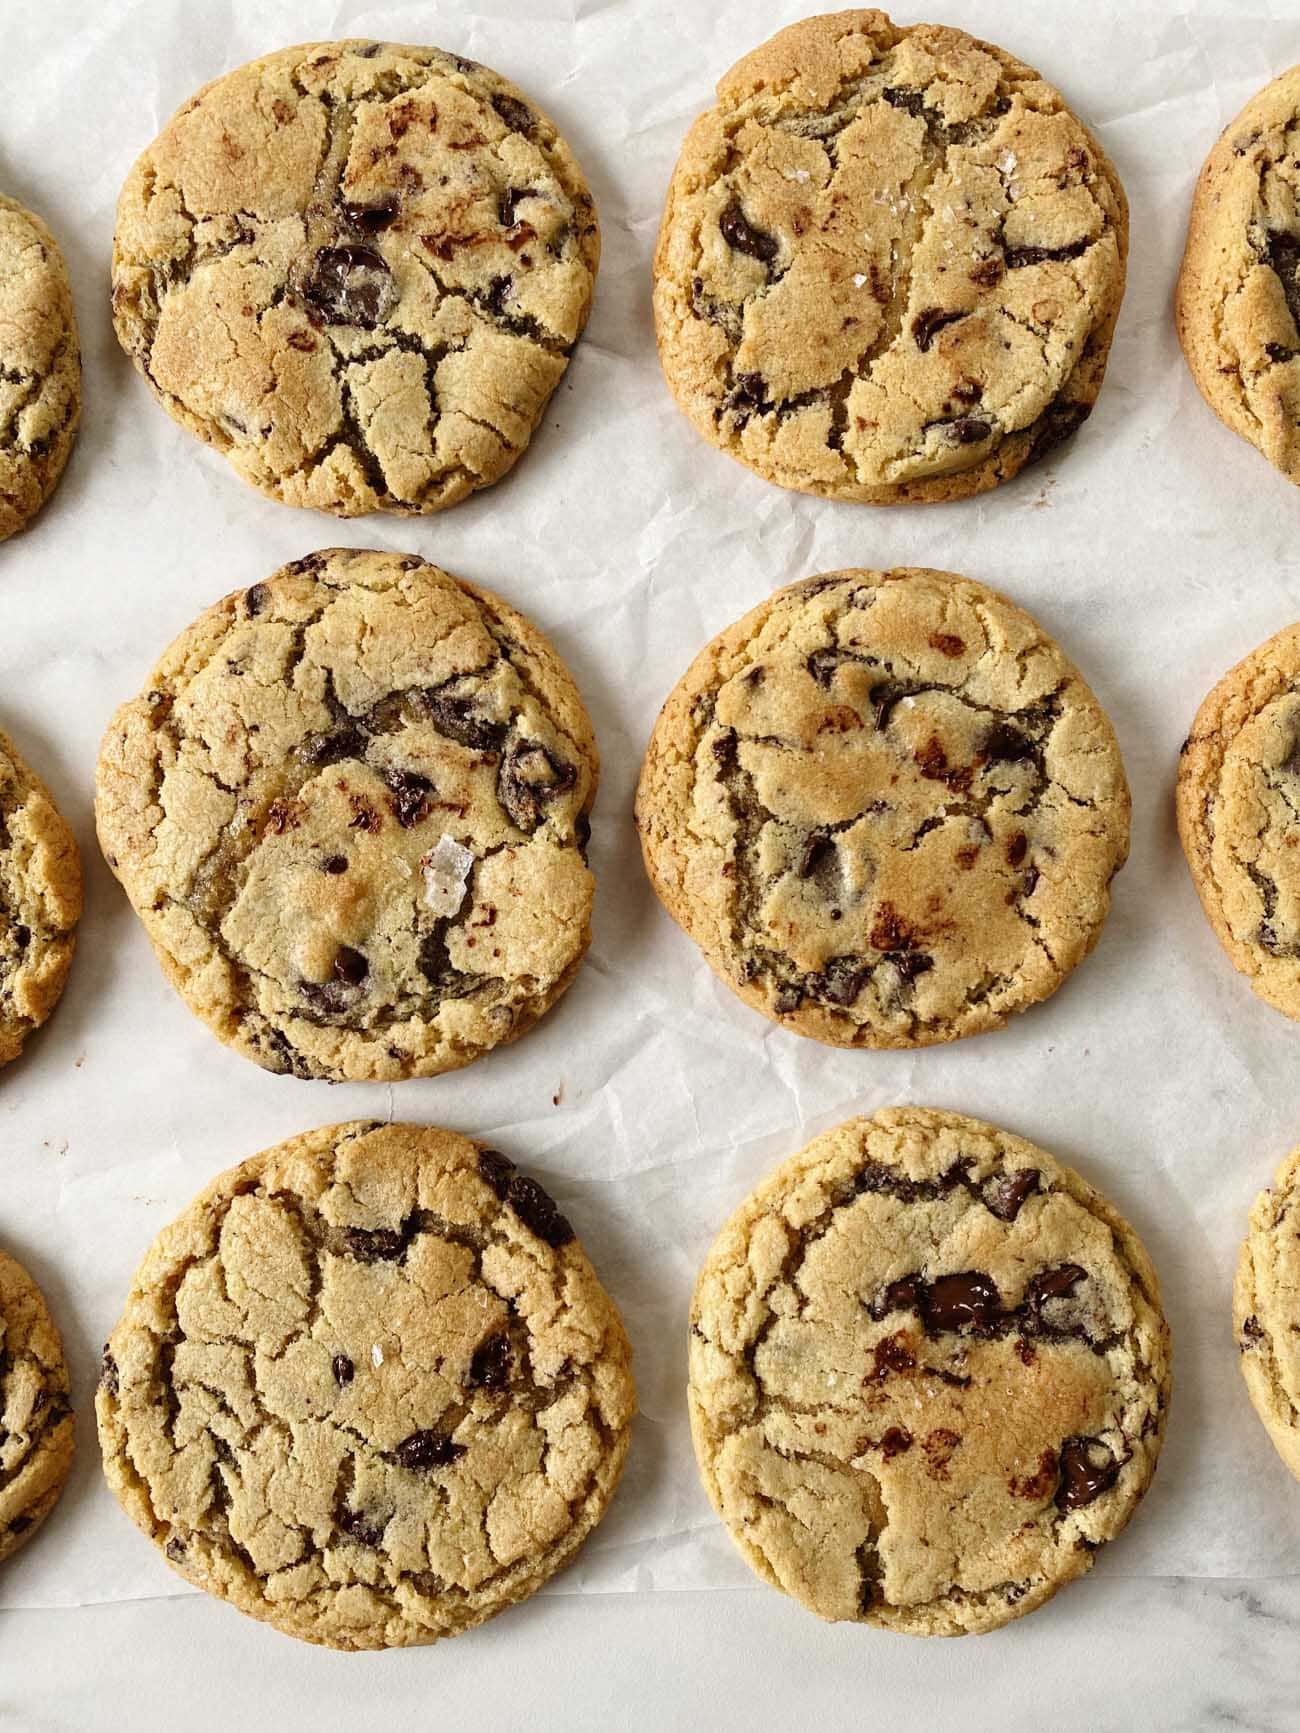 https://www.thevanillabeanblog.com/wp-content/uploads/2022/08/perfect-chocolate-chip-cookies-4.jpg